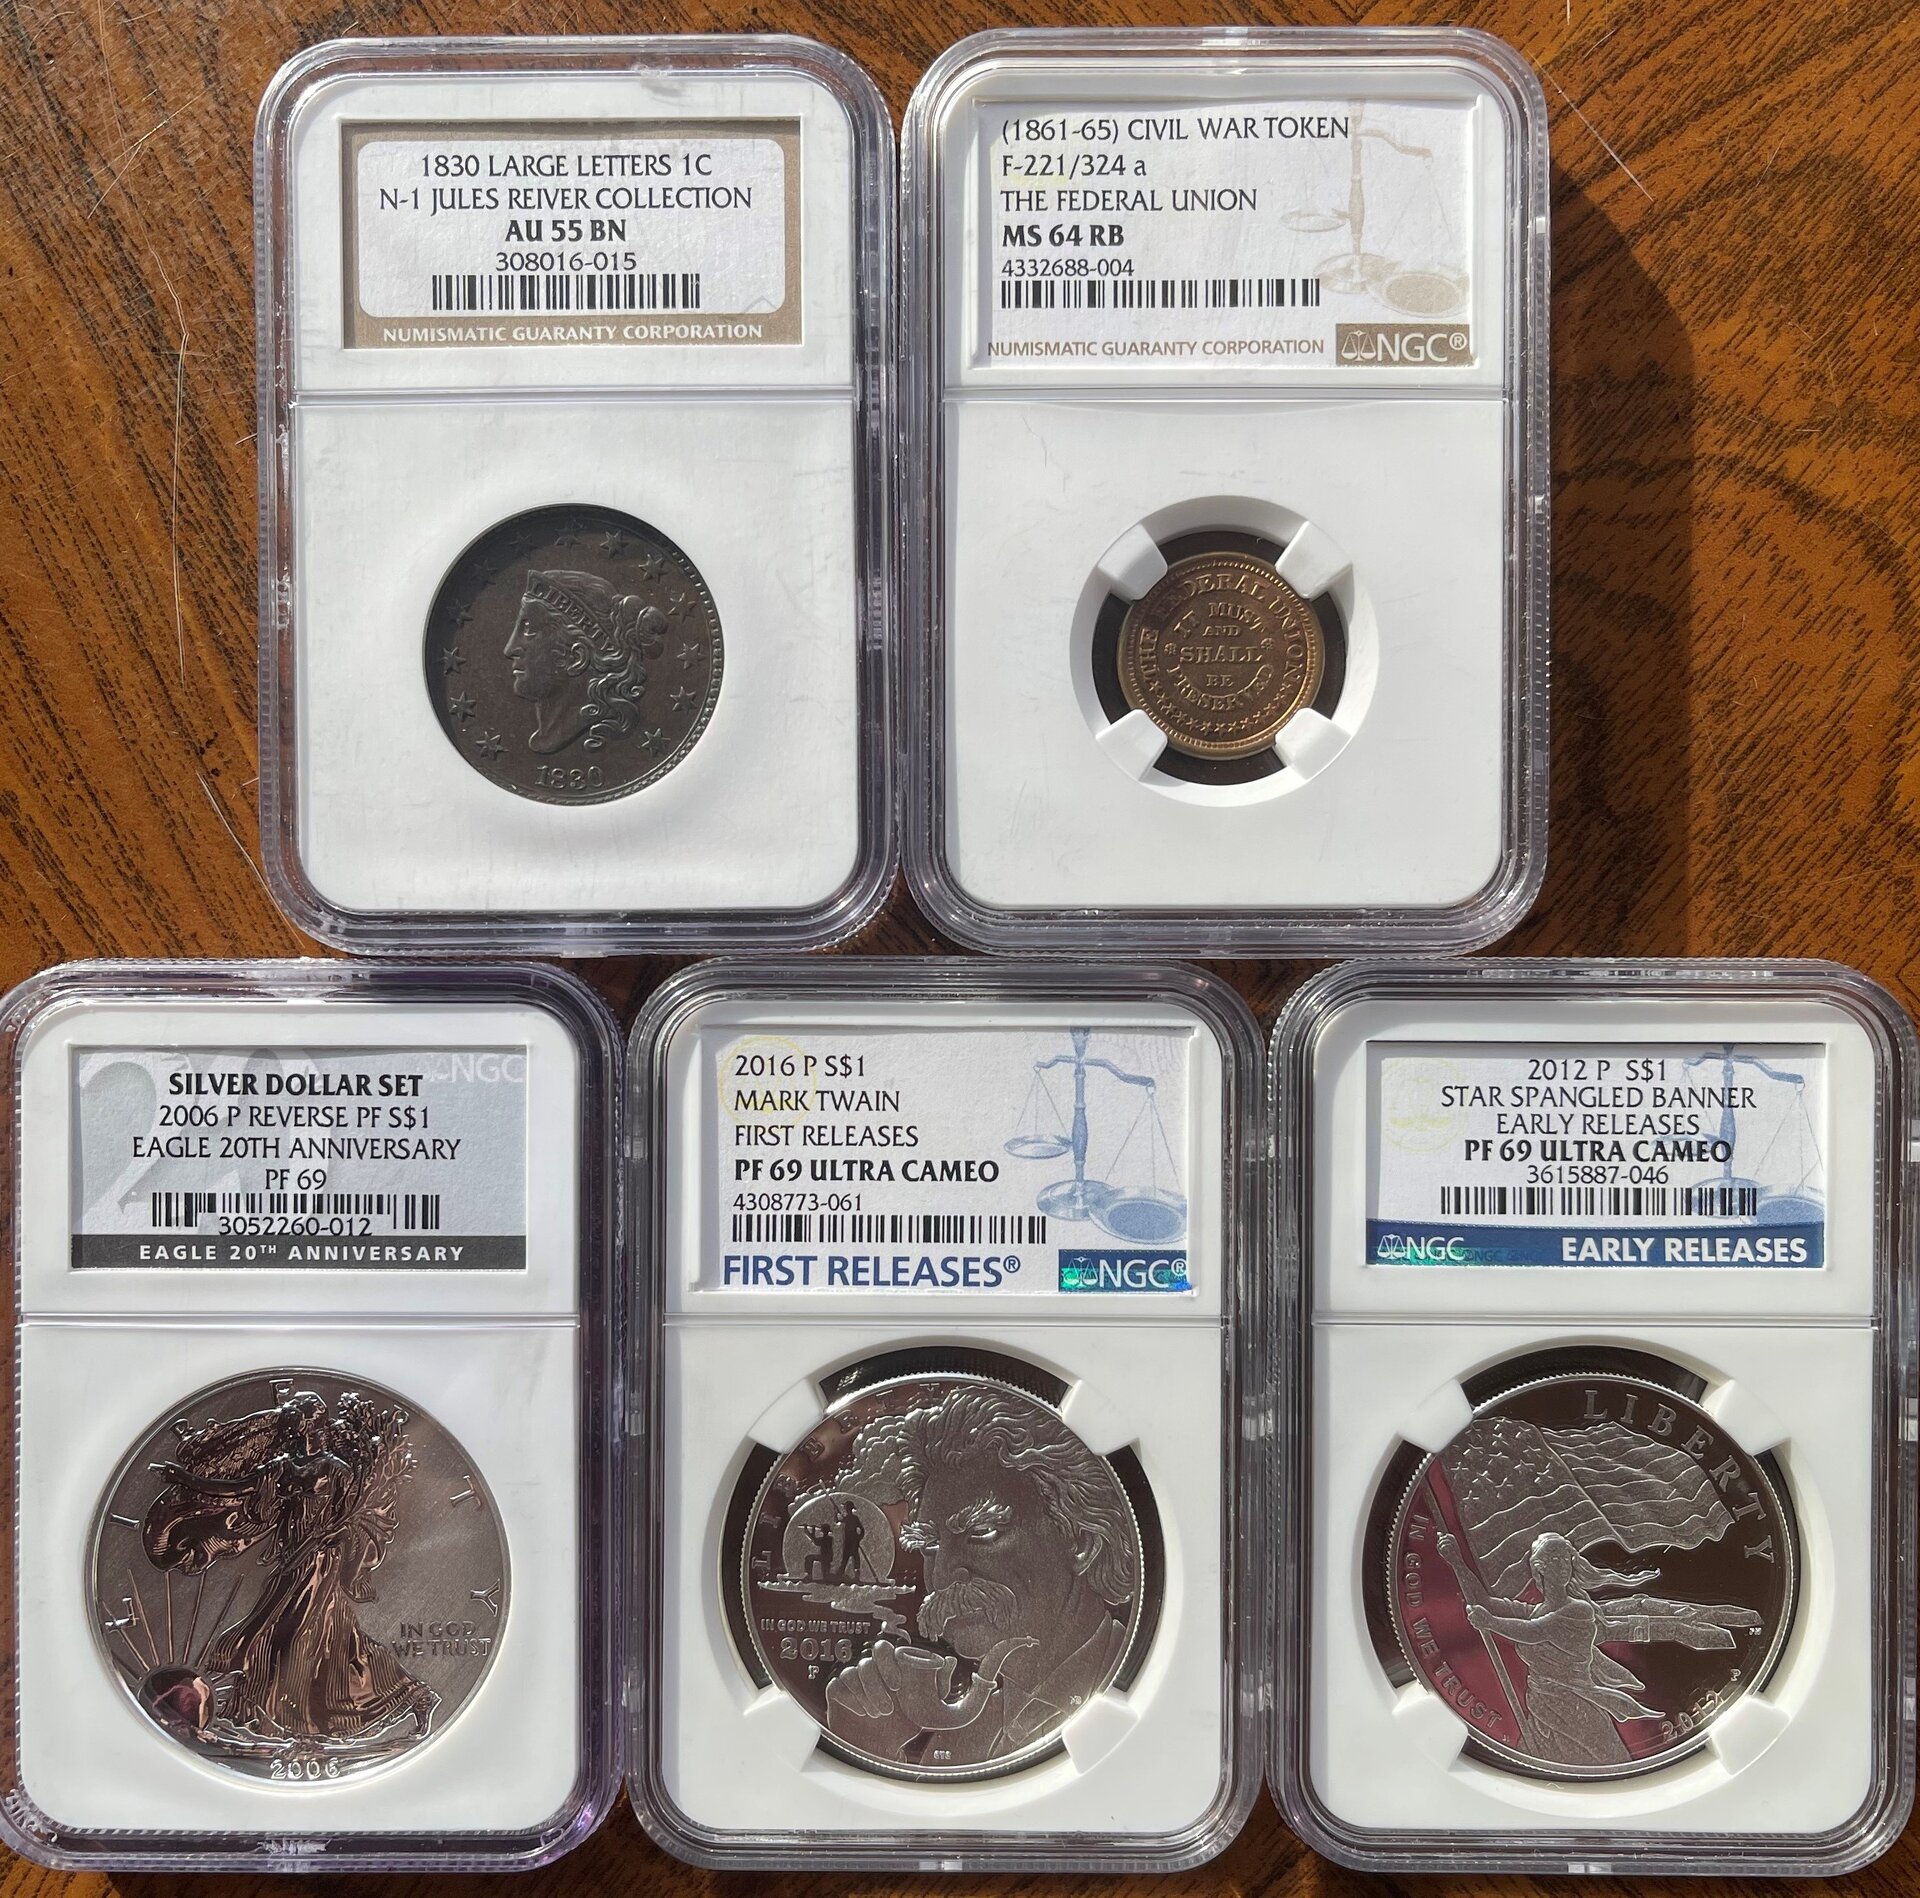 Day 2 MOON coin show pick ups obv (2).jpg